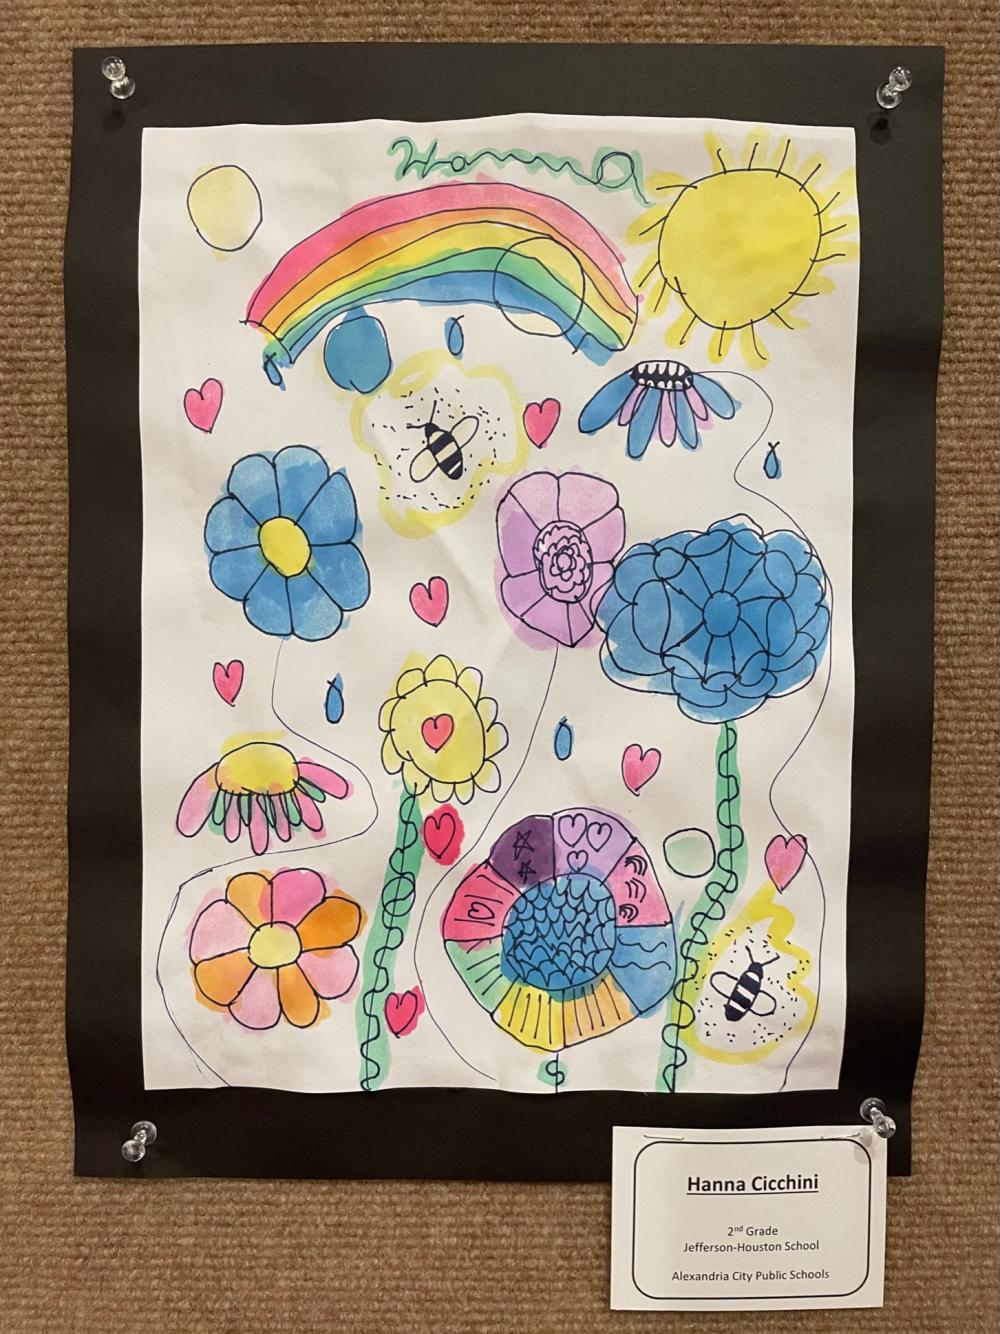 Earth Day student art depicting bees, flowers, rainbows, and a sun